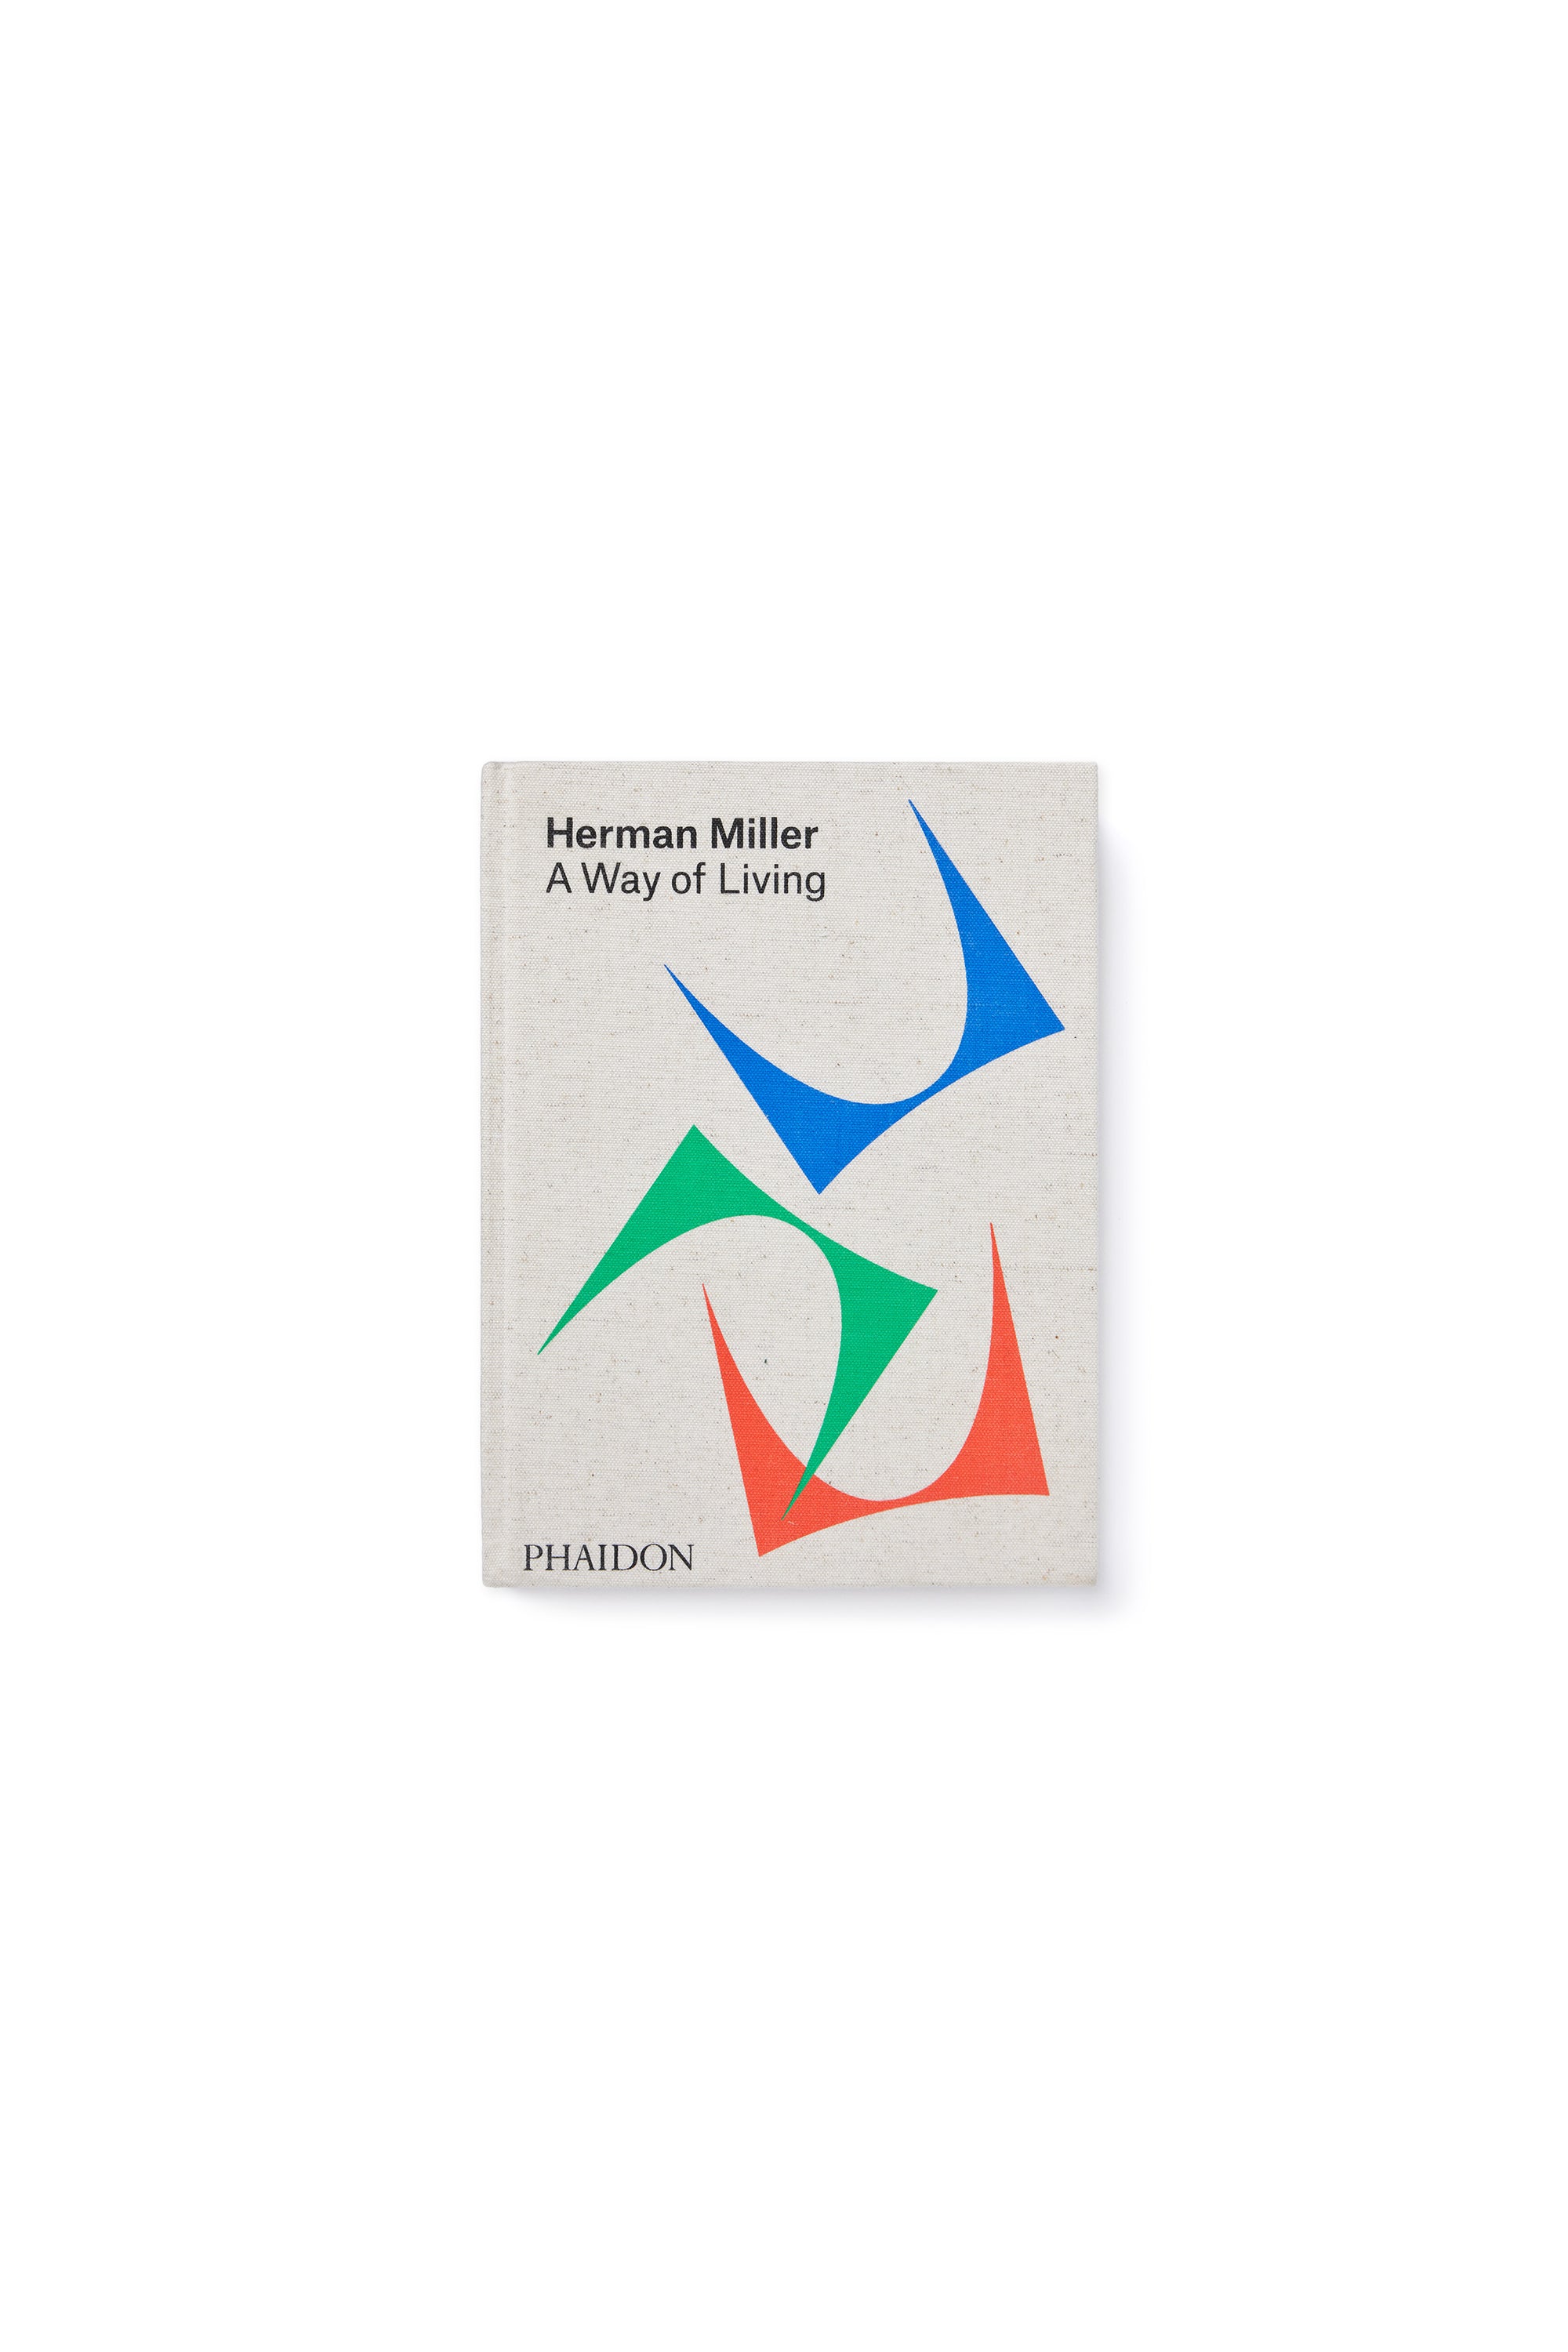 Herman Miller: A Way of Living, 100th Anniversary Reissue